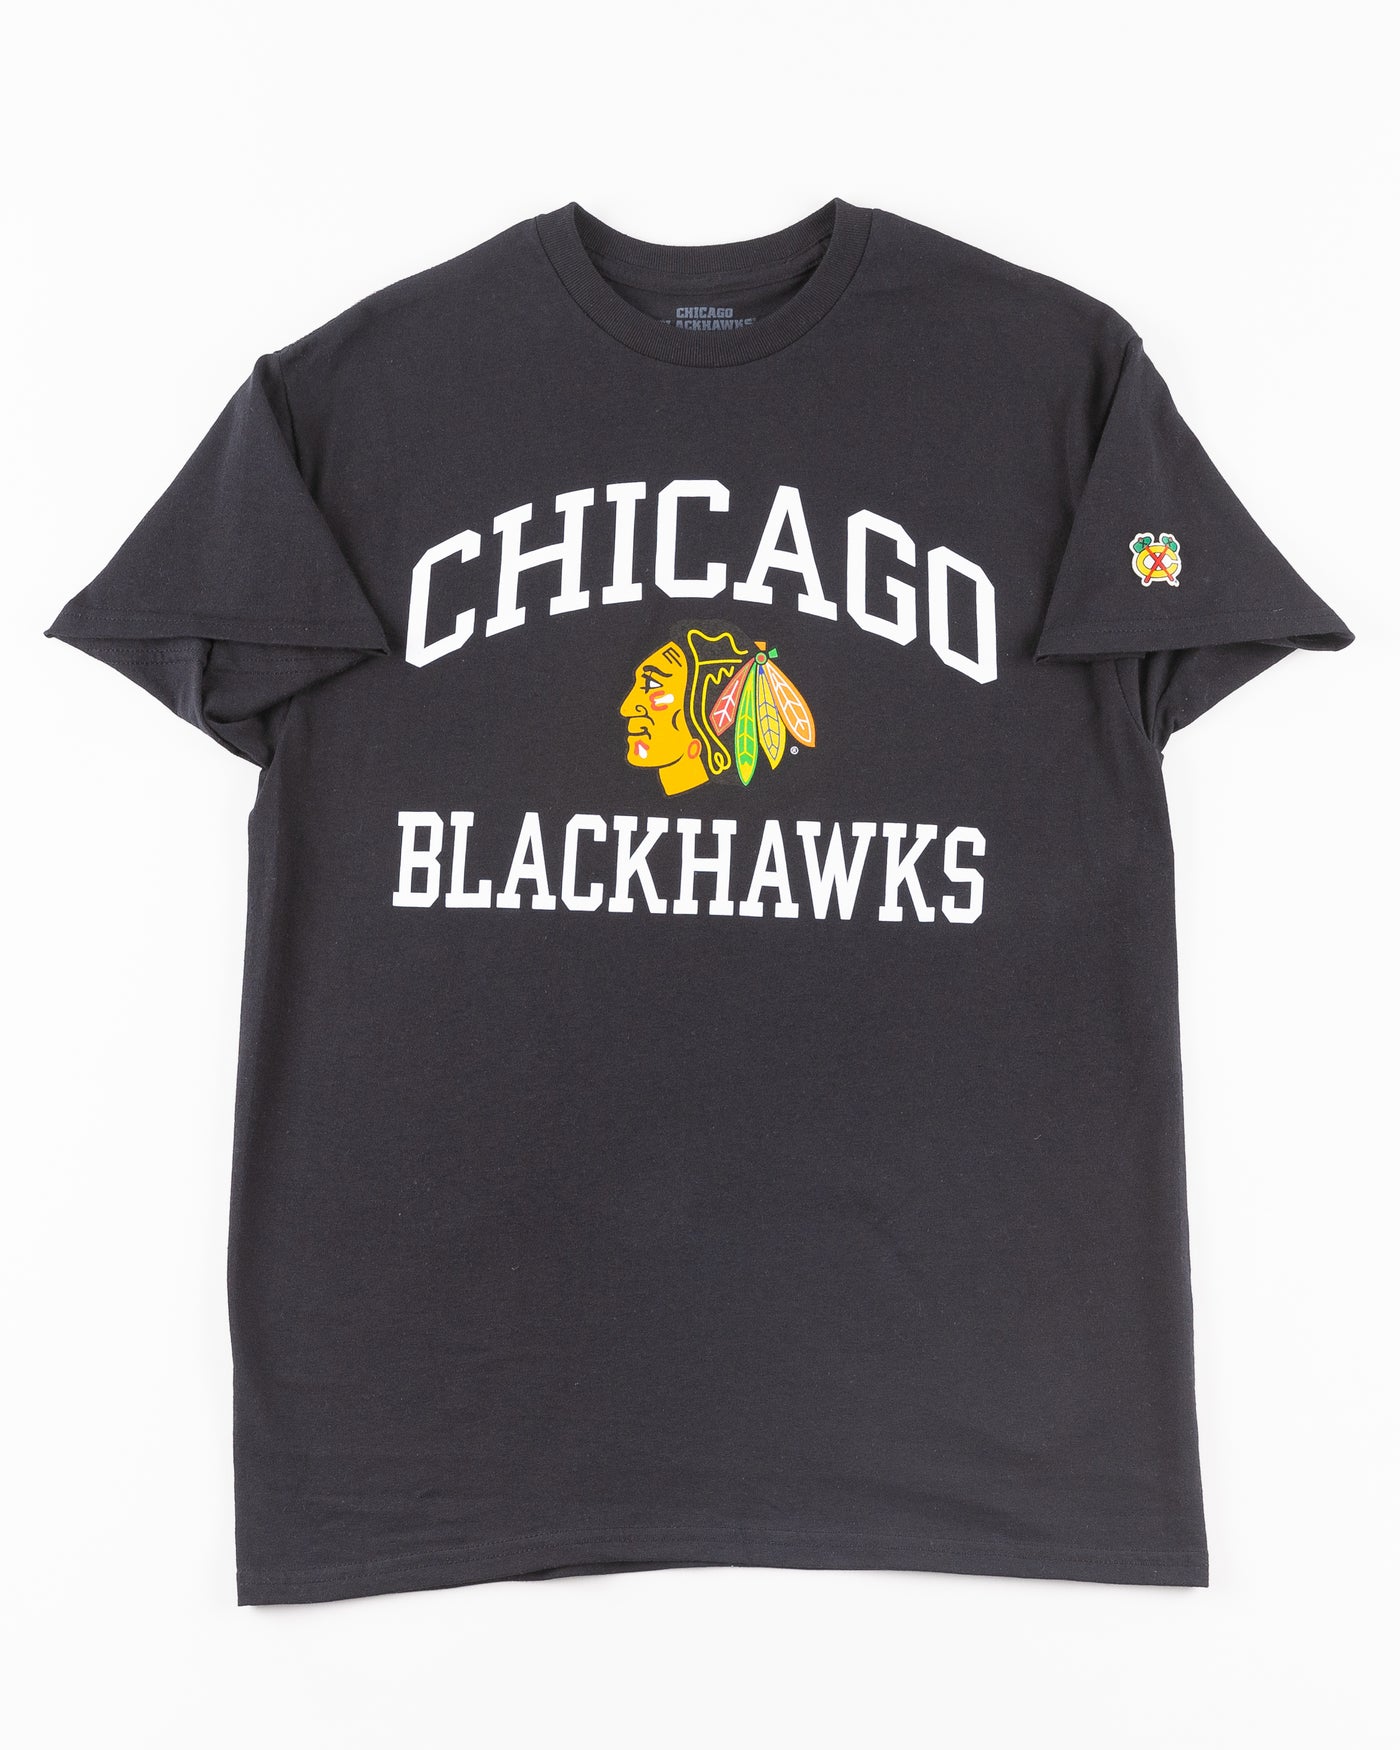 black Chicago Blackhawks short sleeve tee with wordmark and primary logo on chest and secondary logo on left shoulder - front lay flat